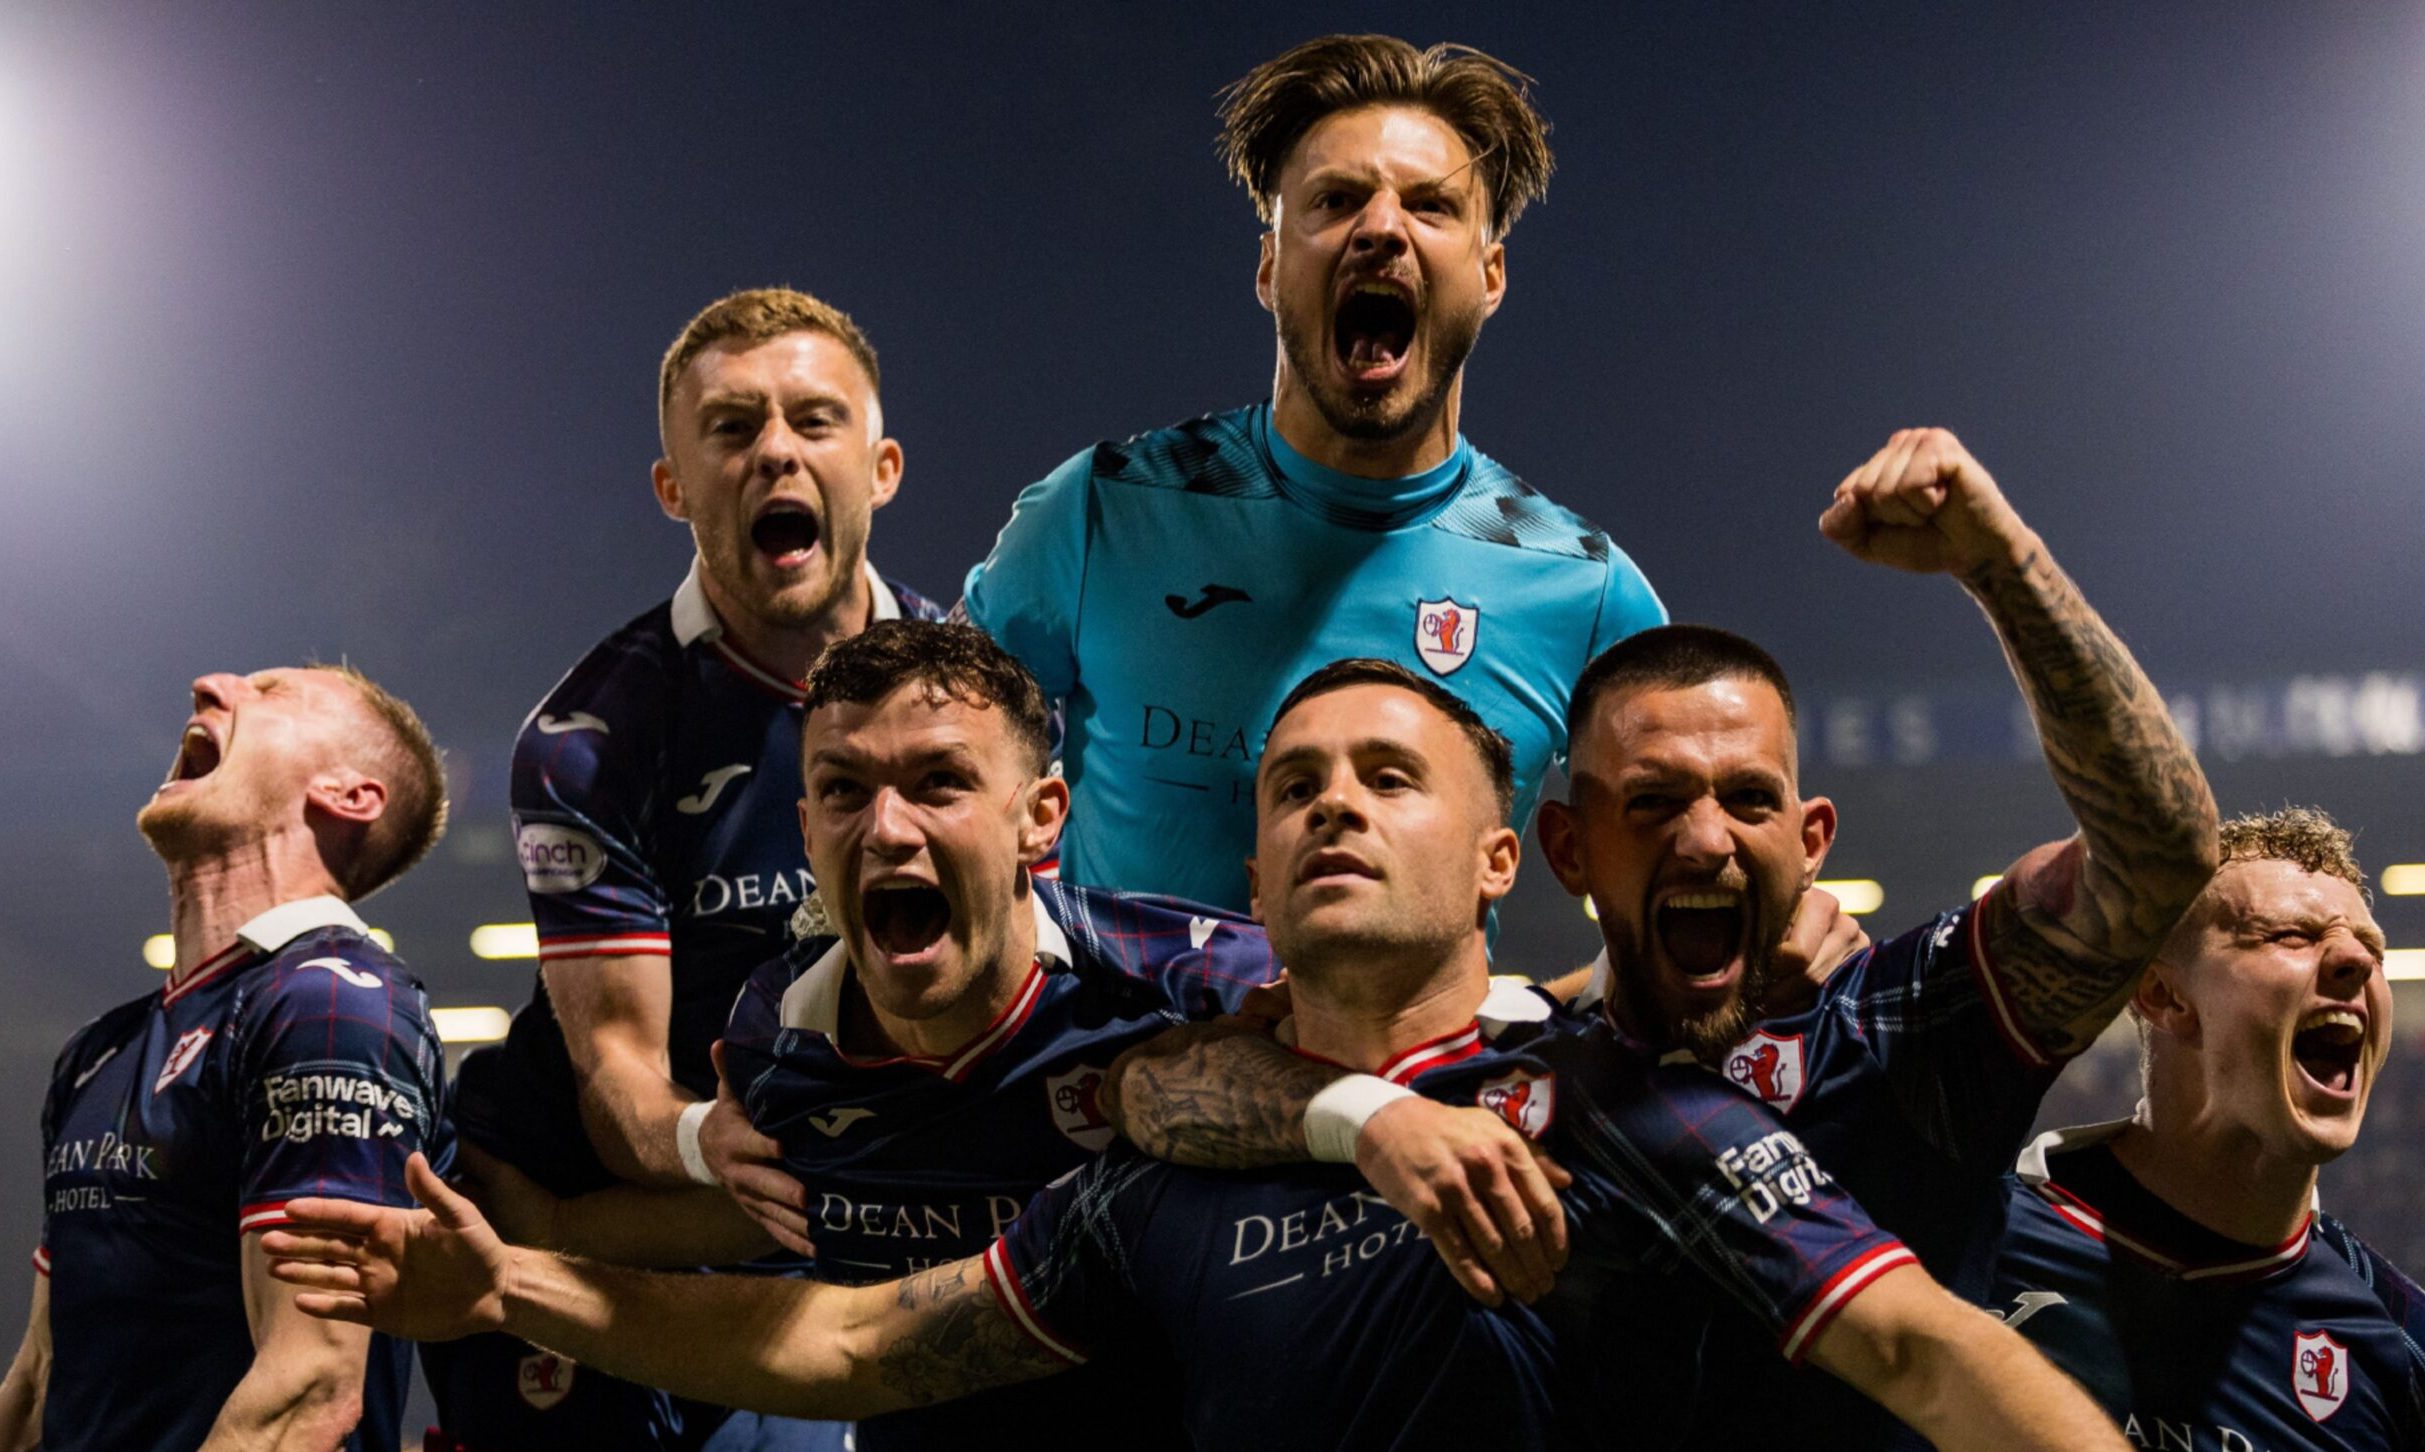 The Raith Rovers players celebrate after beating Partick Thistle.